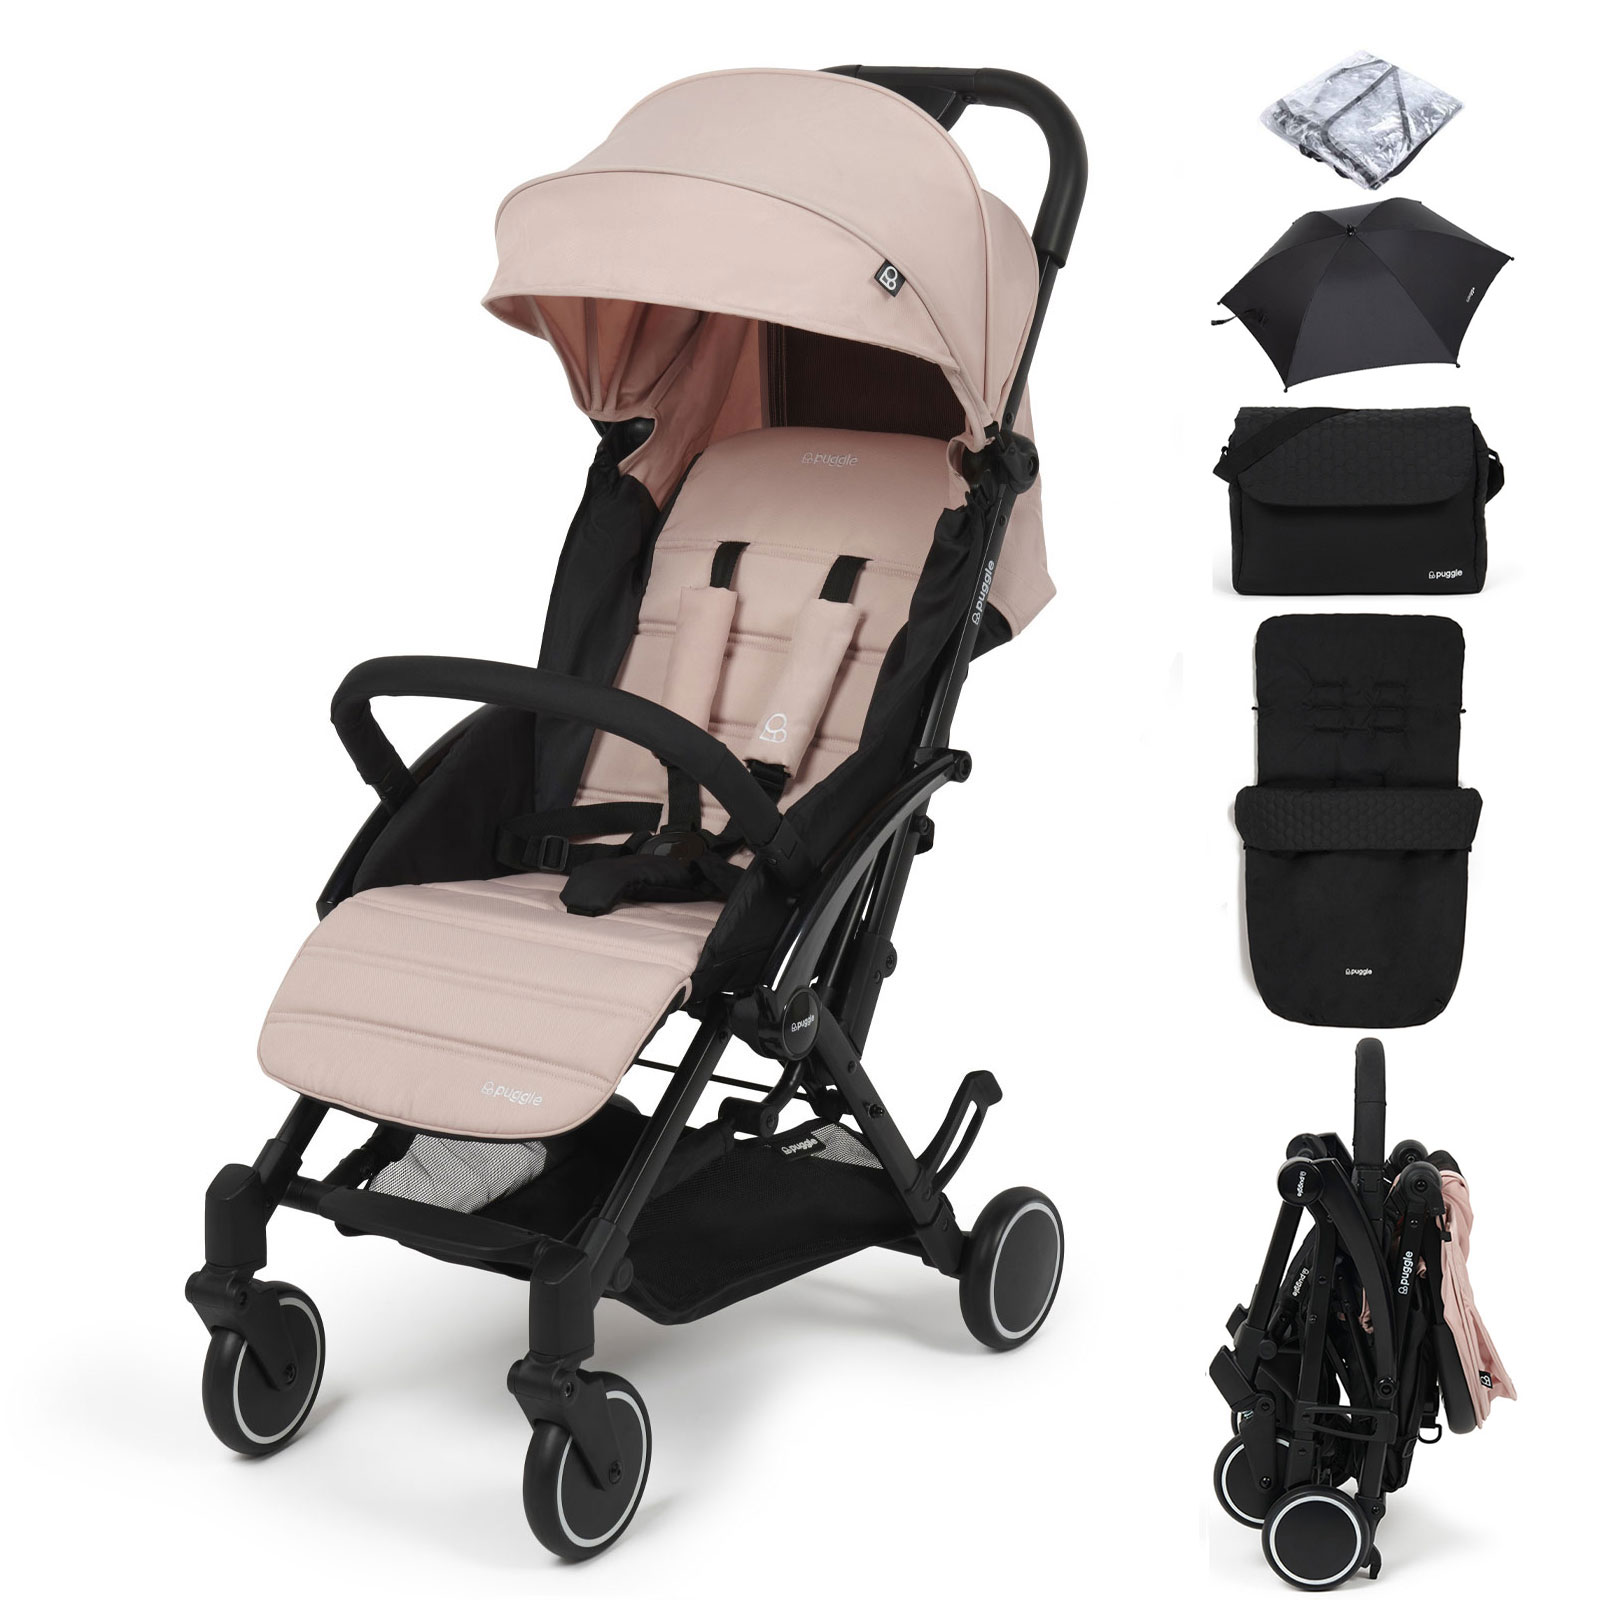 Puggle Seattle Fold & Go Compact Pushchair & Raincover With Honeycomb Footmuff, Changing Bag & Parasol - Blush Pink